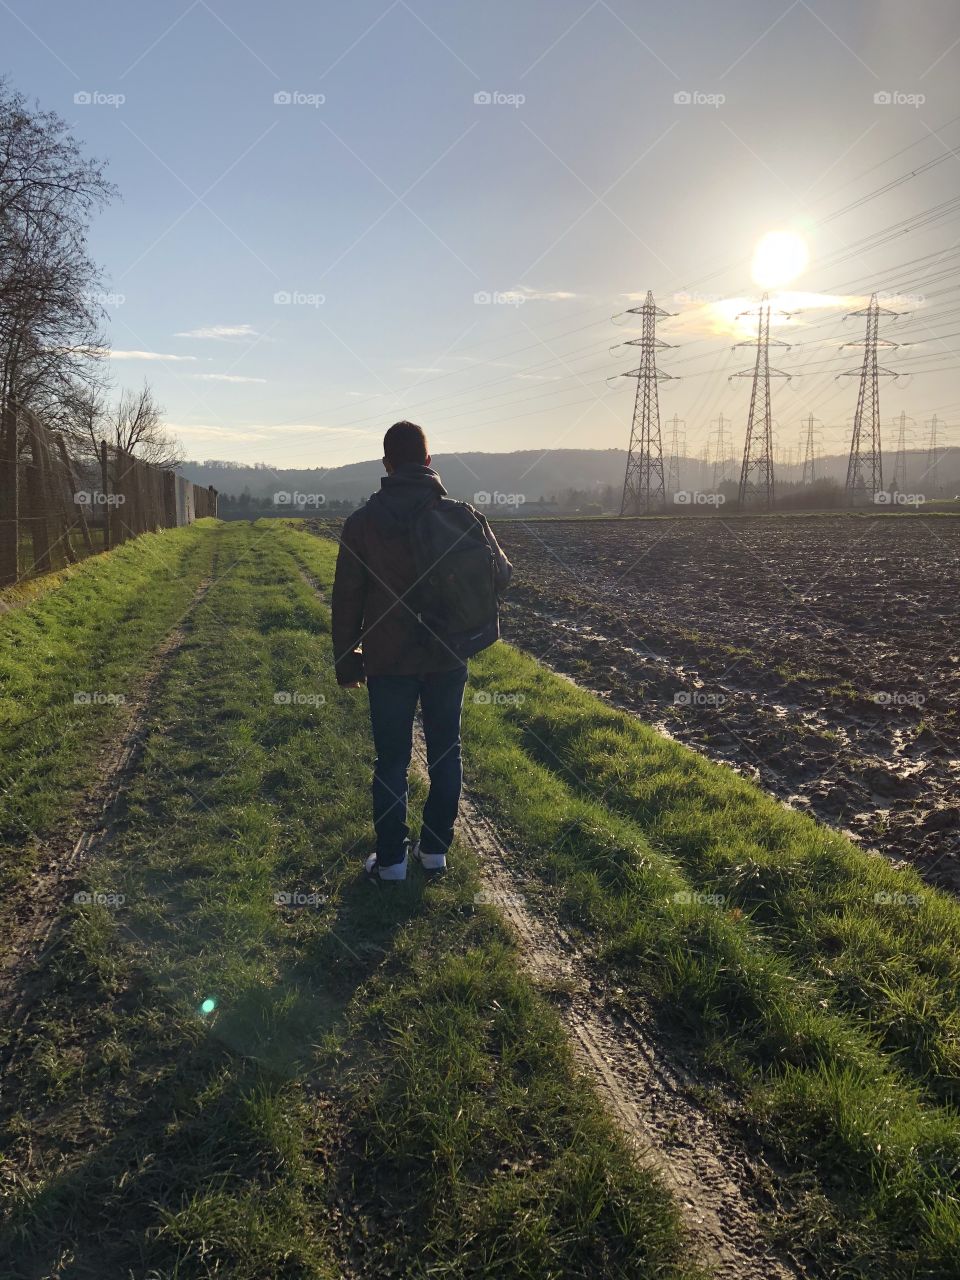 A walk at sunset with my boyfriend in the fields of Southern France